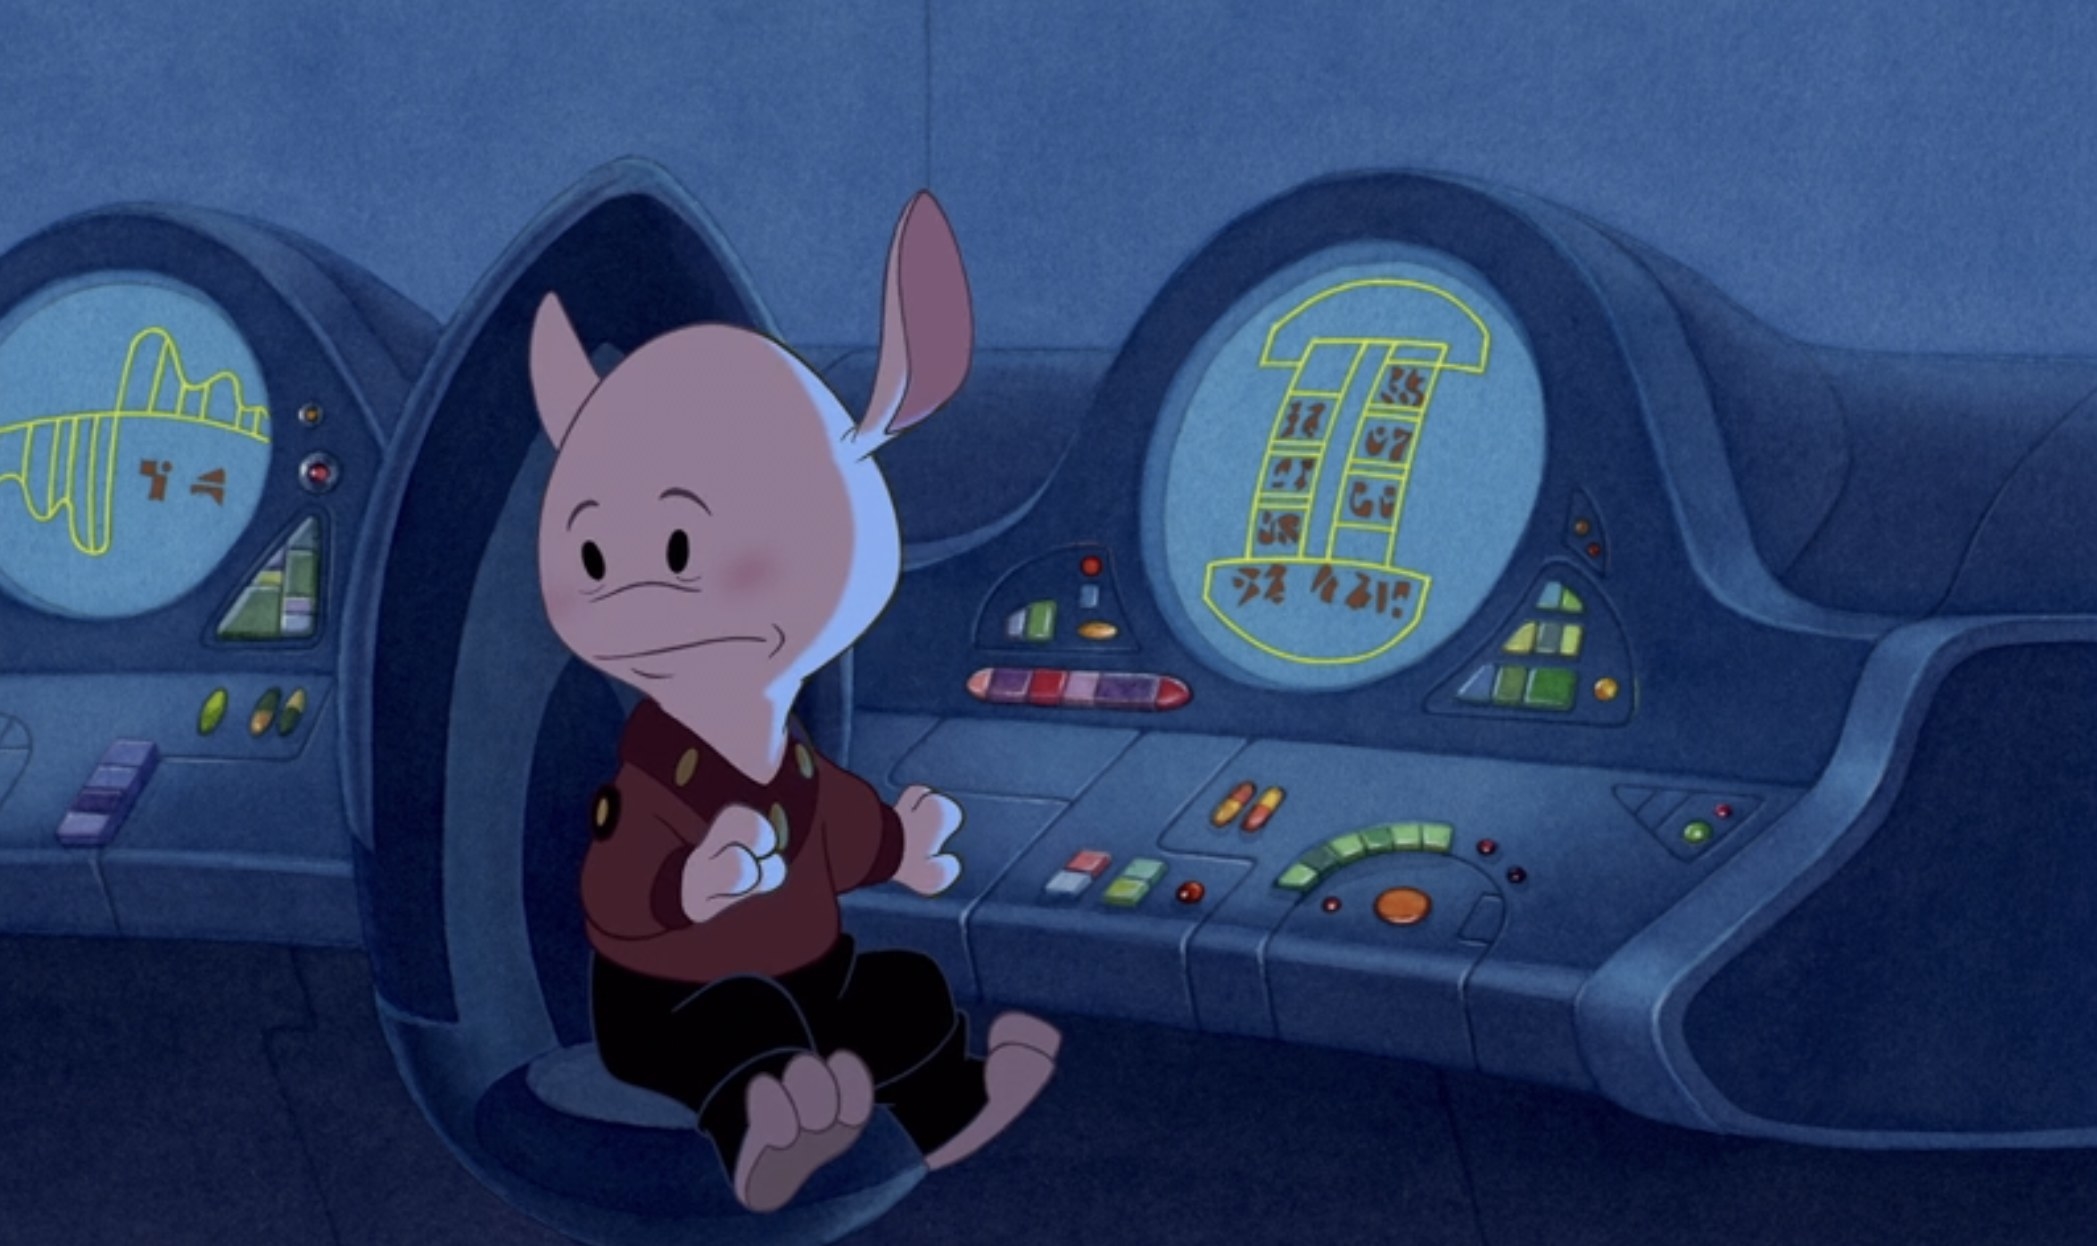 An alien who looks like Piglet from Winnie the Pooh